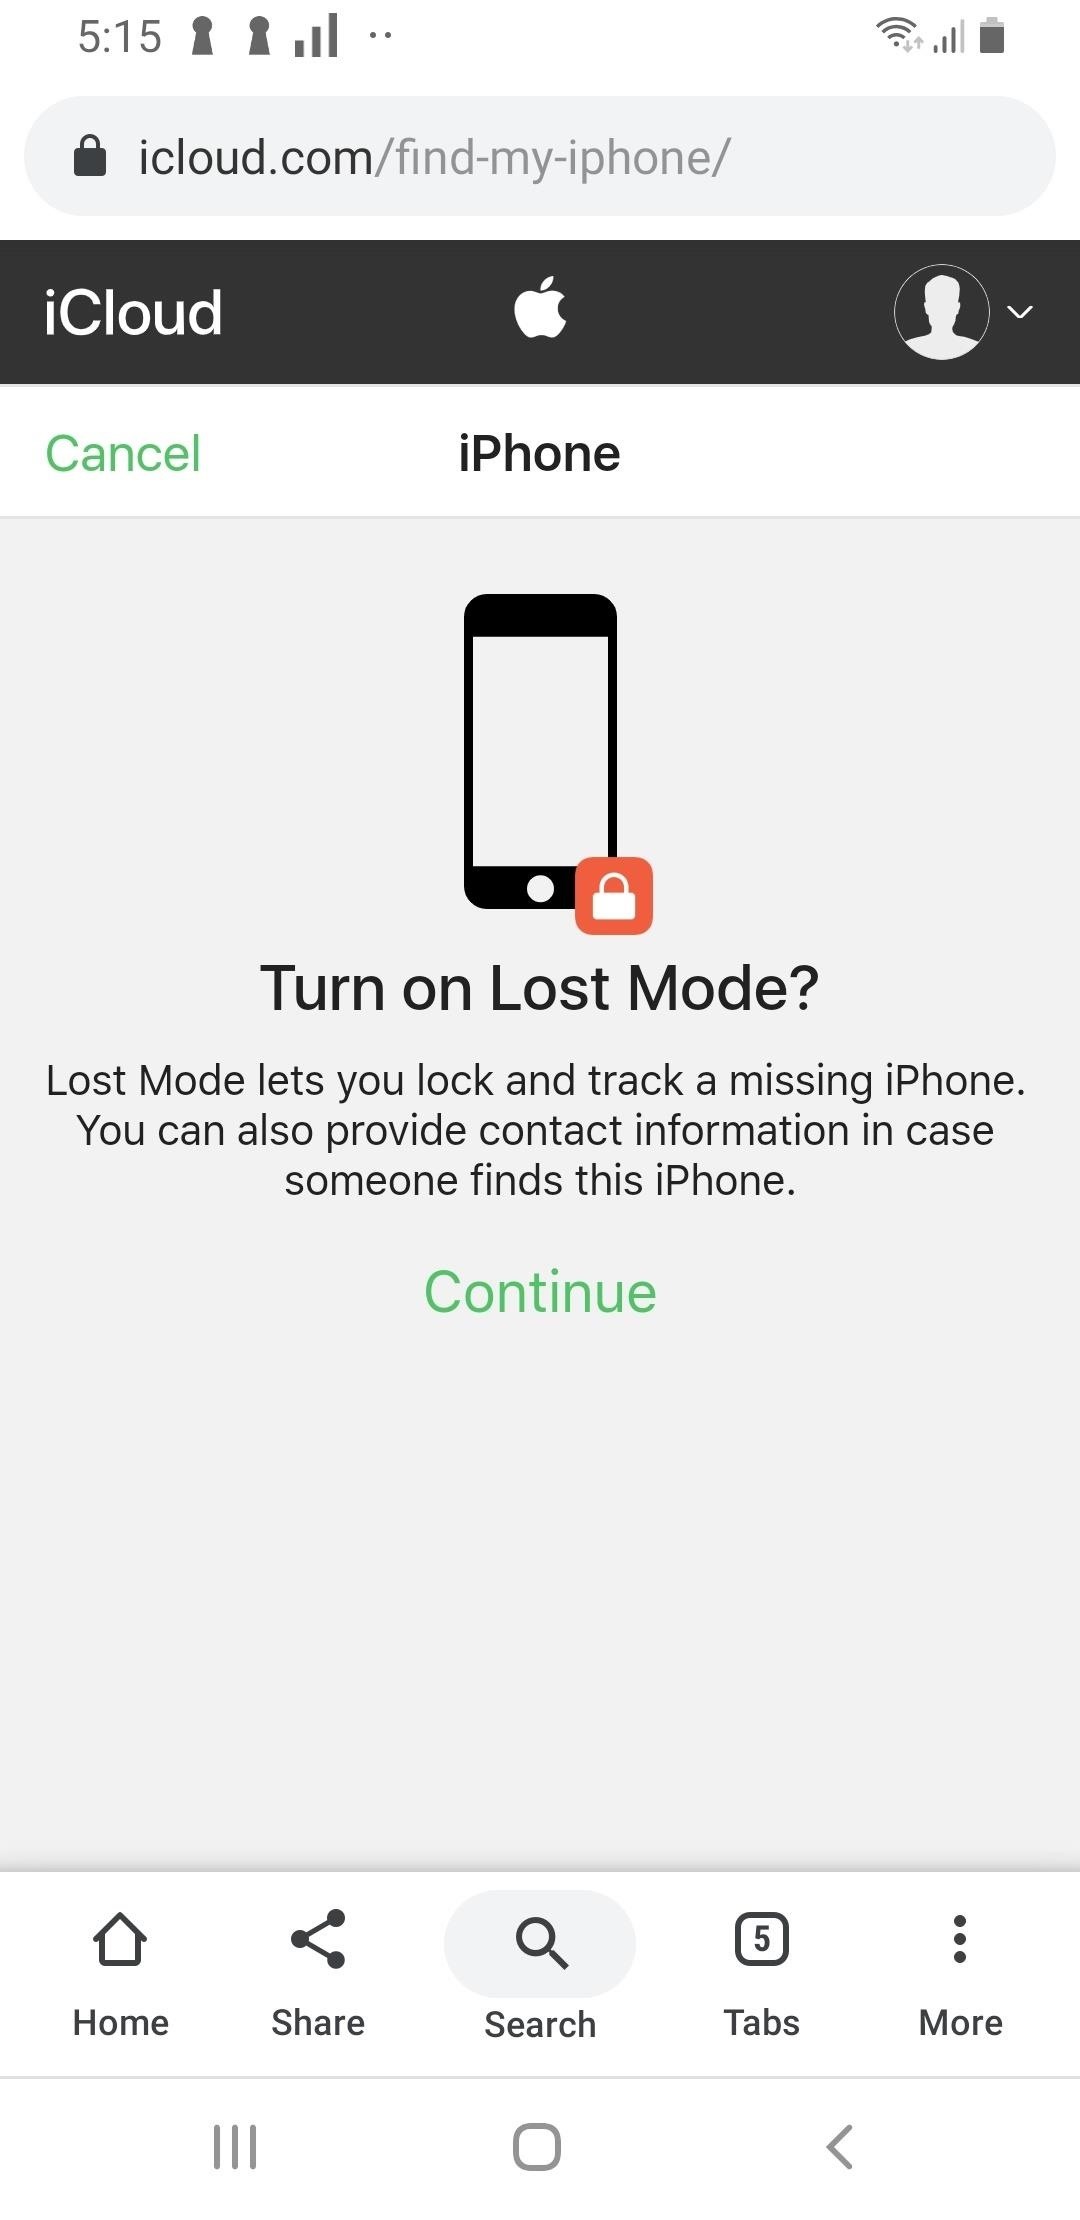 Remotely Silence Alarms, Messages, Calls, Notifications & Other Sounds on Your iPhone to Keep Others from Finding It